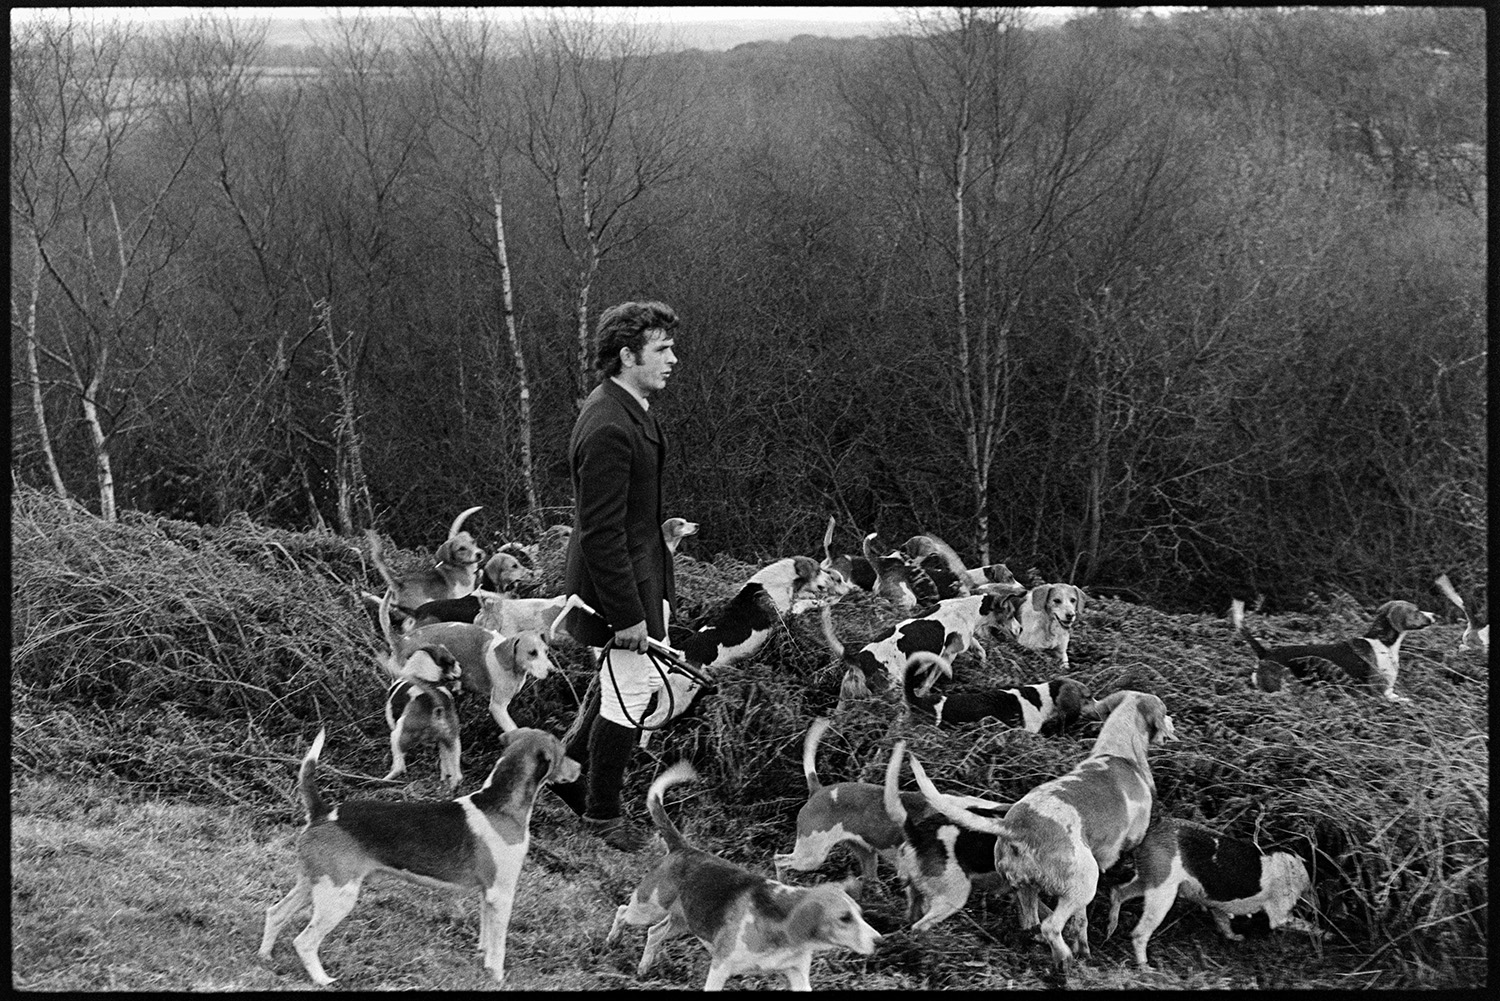 Foot Beagles on moor with followers. 
[A man hunting with Beagles on Hatherleigh Moor. Trees and woodland can be seen in the background.]